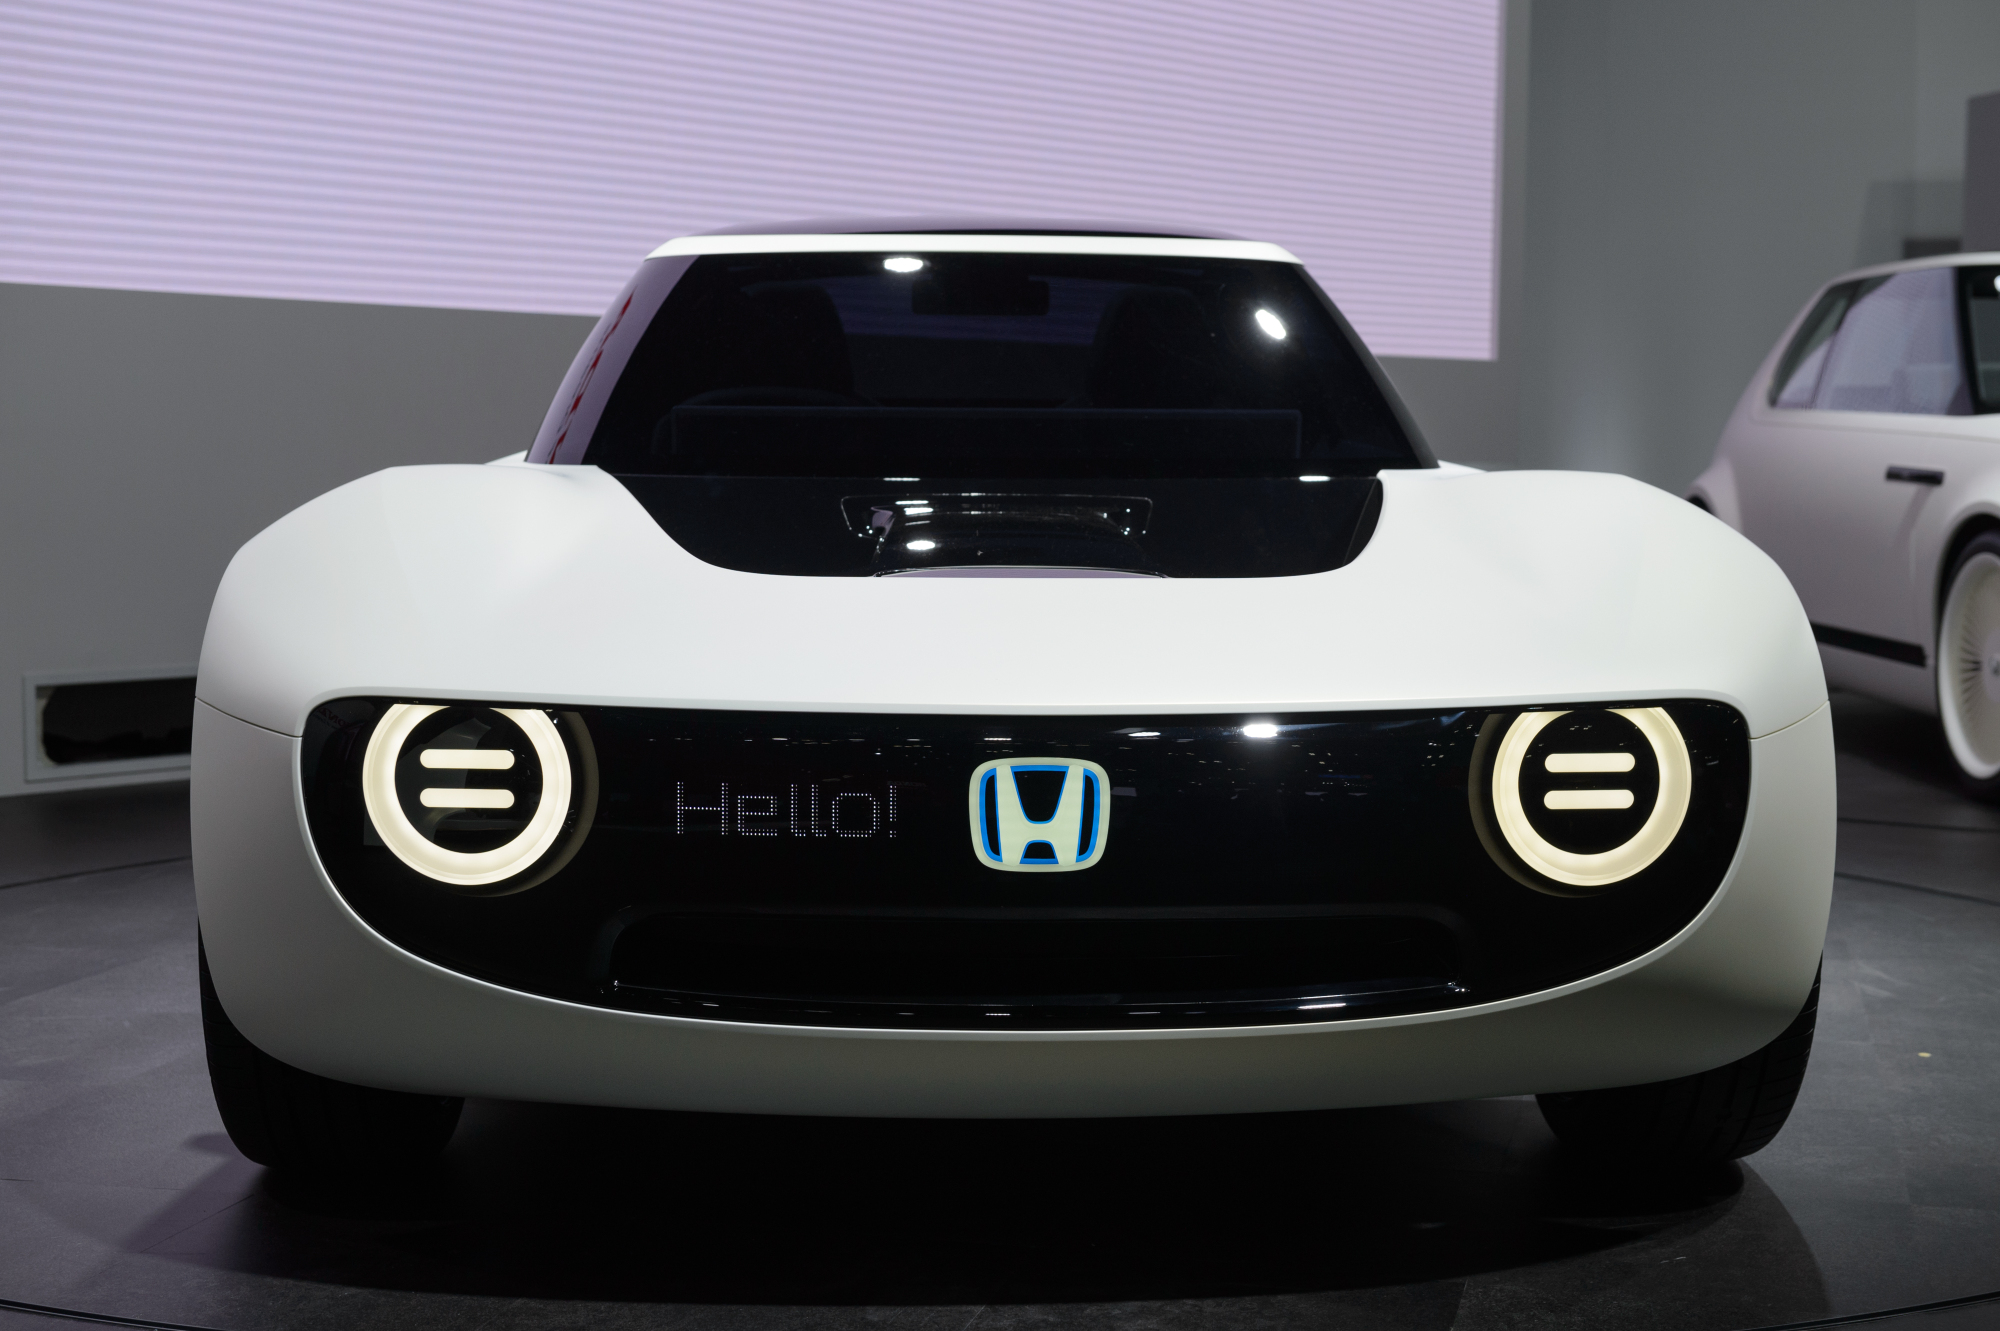 Honda Motor Co. says it will jointly develop 'connected cars' with Alibaba Group Holding Ltd., to offer online services to drivers. | BLOOMBERG